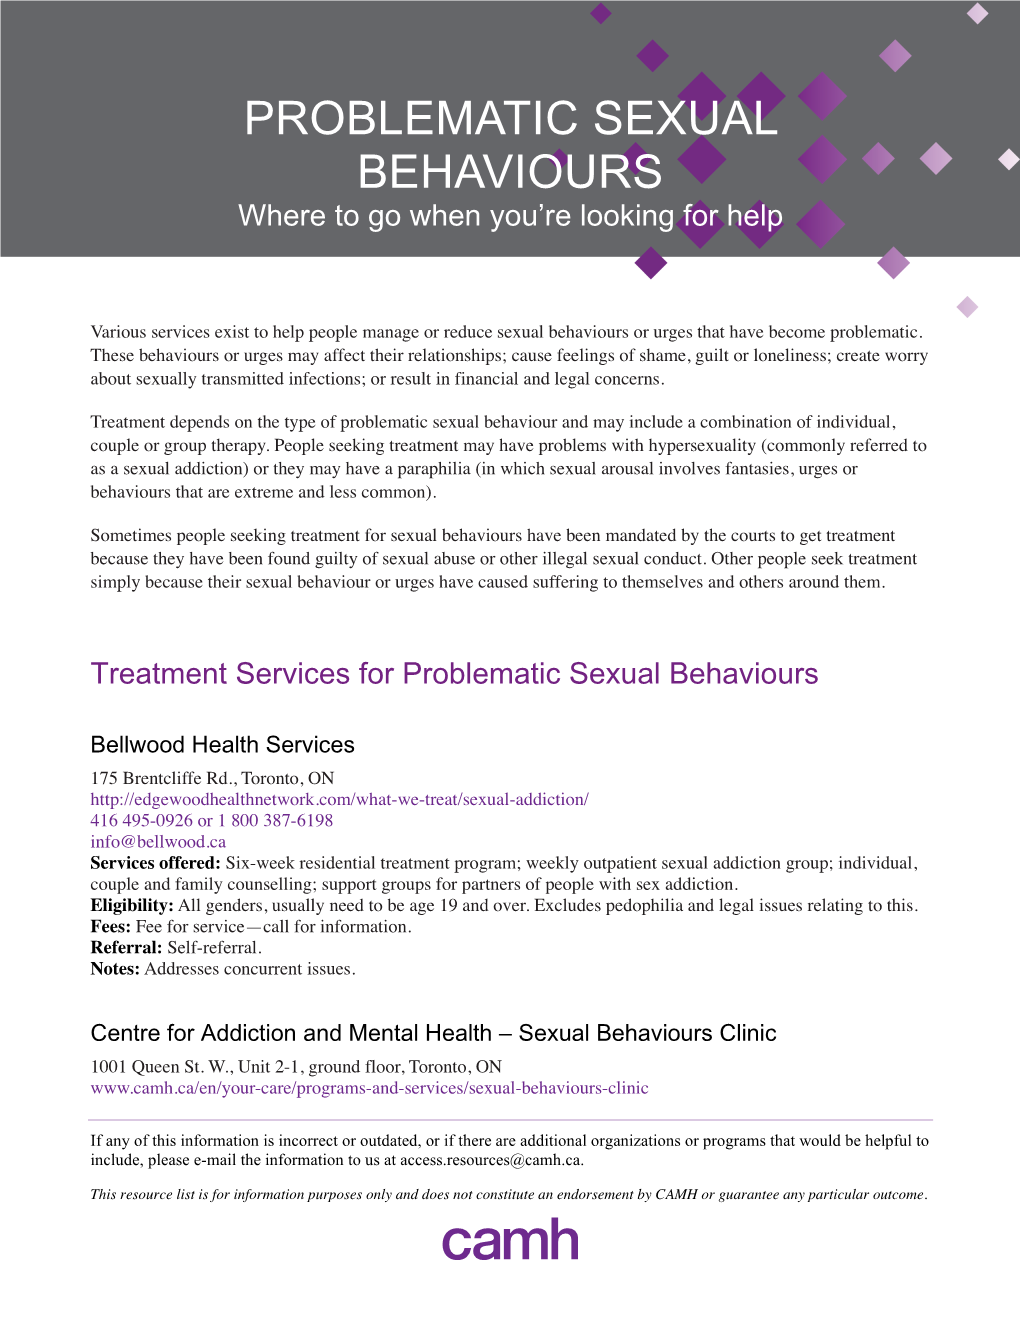 PROBLEMATIC SEXUAL BEHAVIOURS Where to Go When You’Re Looking for Help